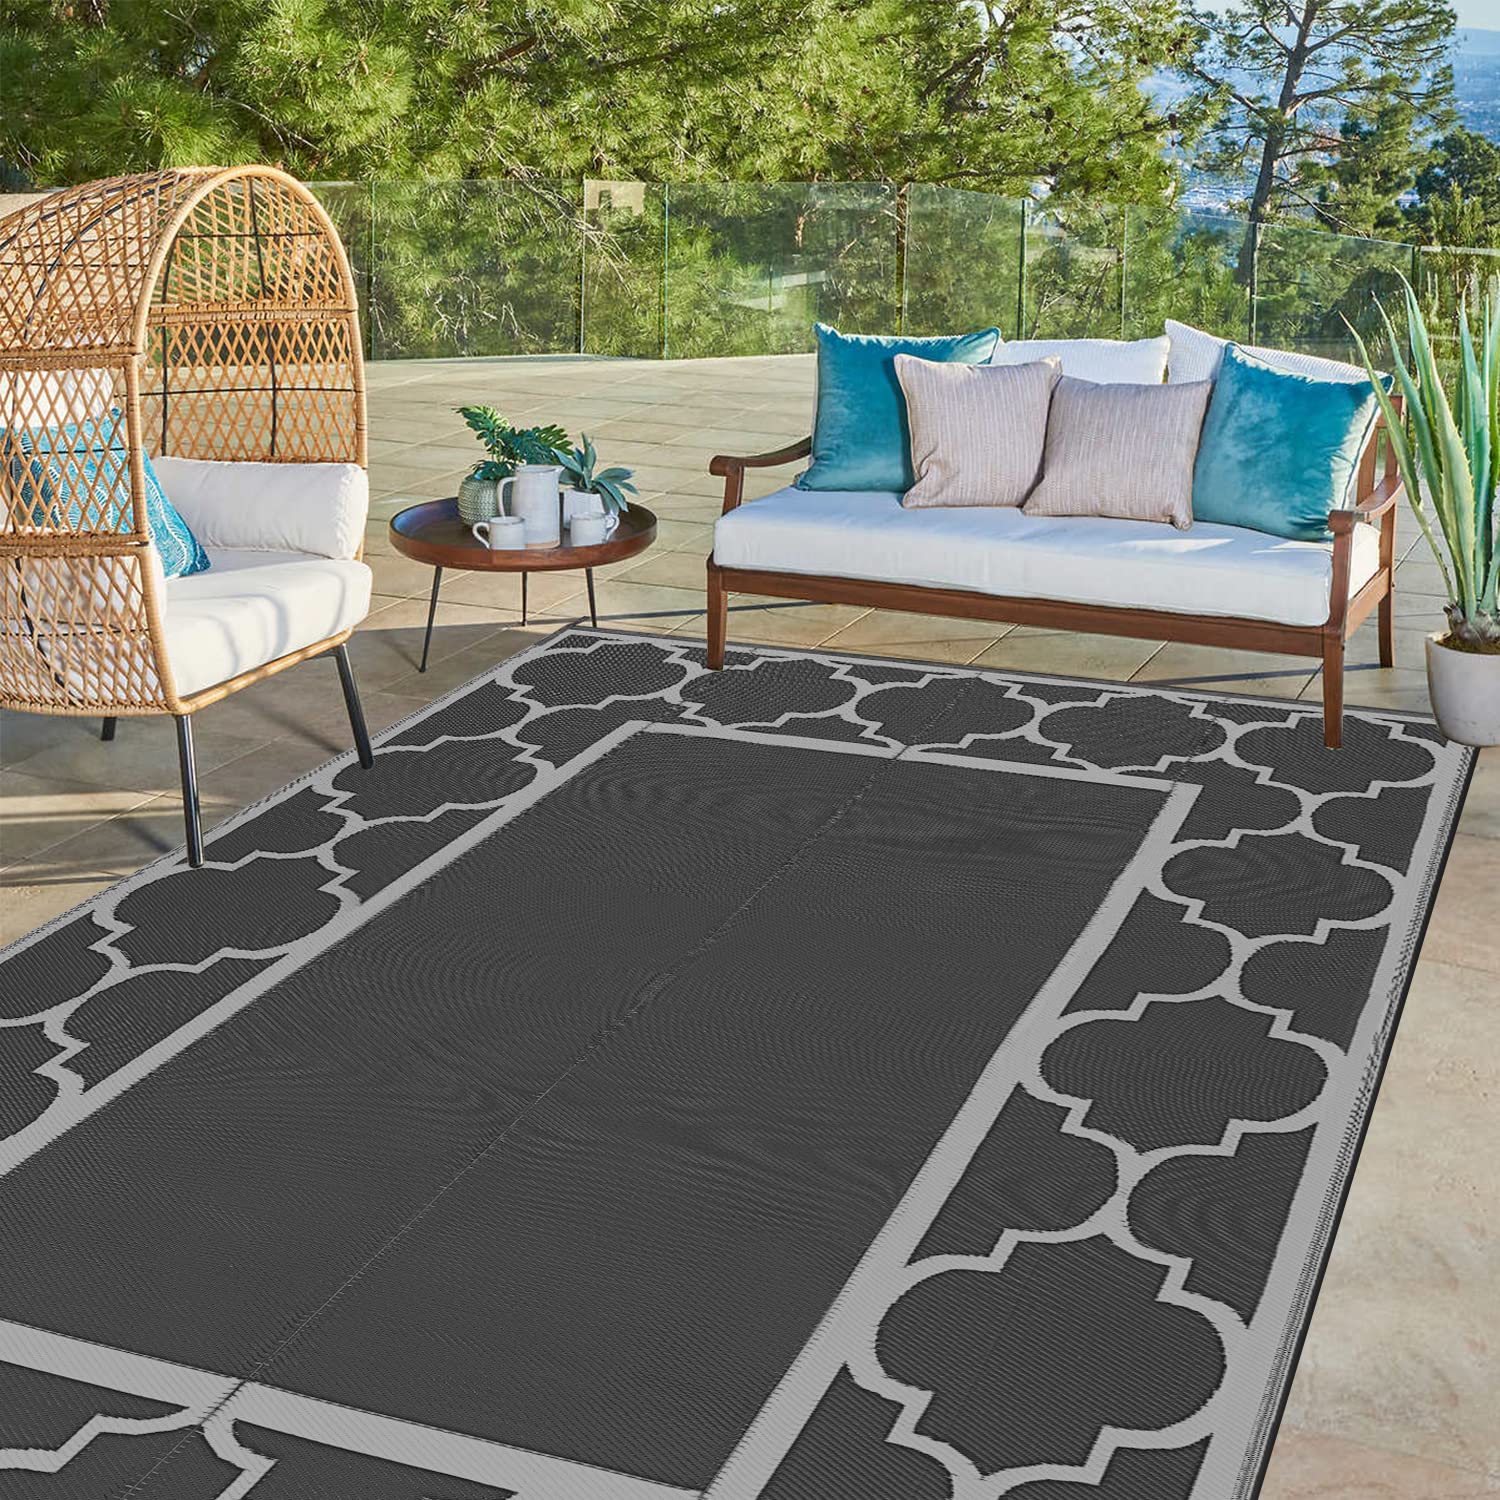 Reversible Mats - Outdoor Rugs 9'x12' for Patios Clearance, Plastic Straw  Rugs Waterproof, Portable, Large Floor Mat and Rugs for Outdoor RV,  Balcony